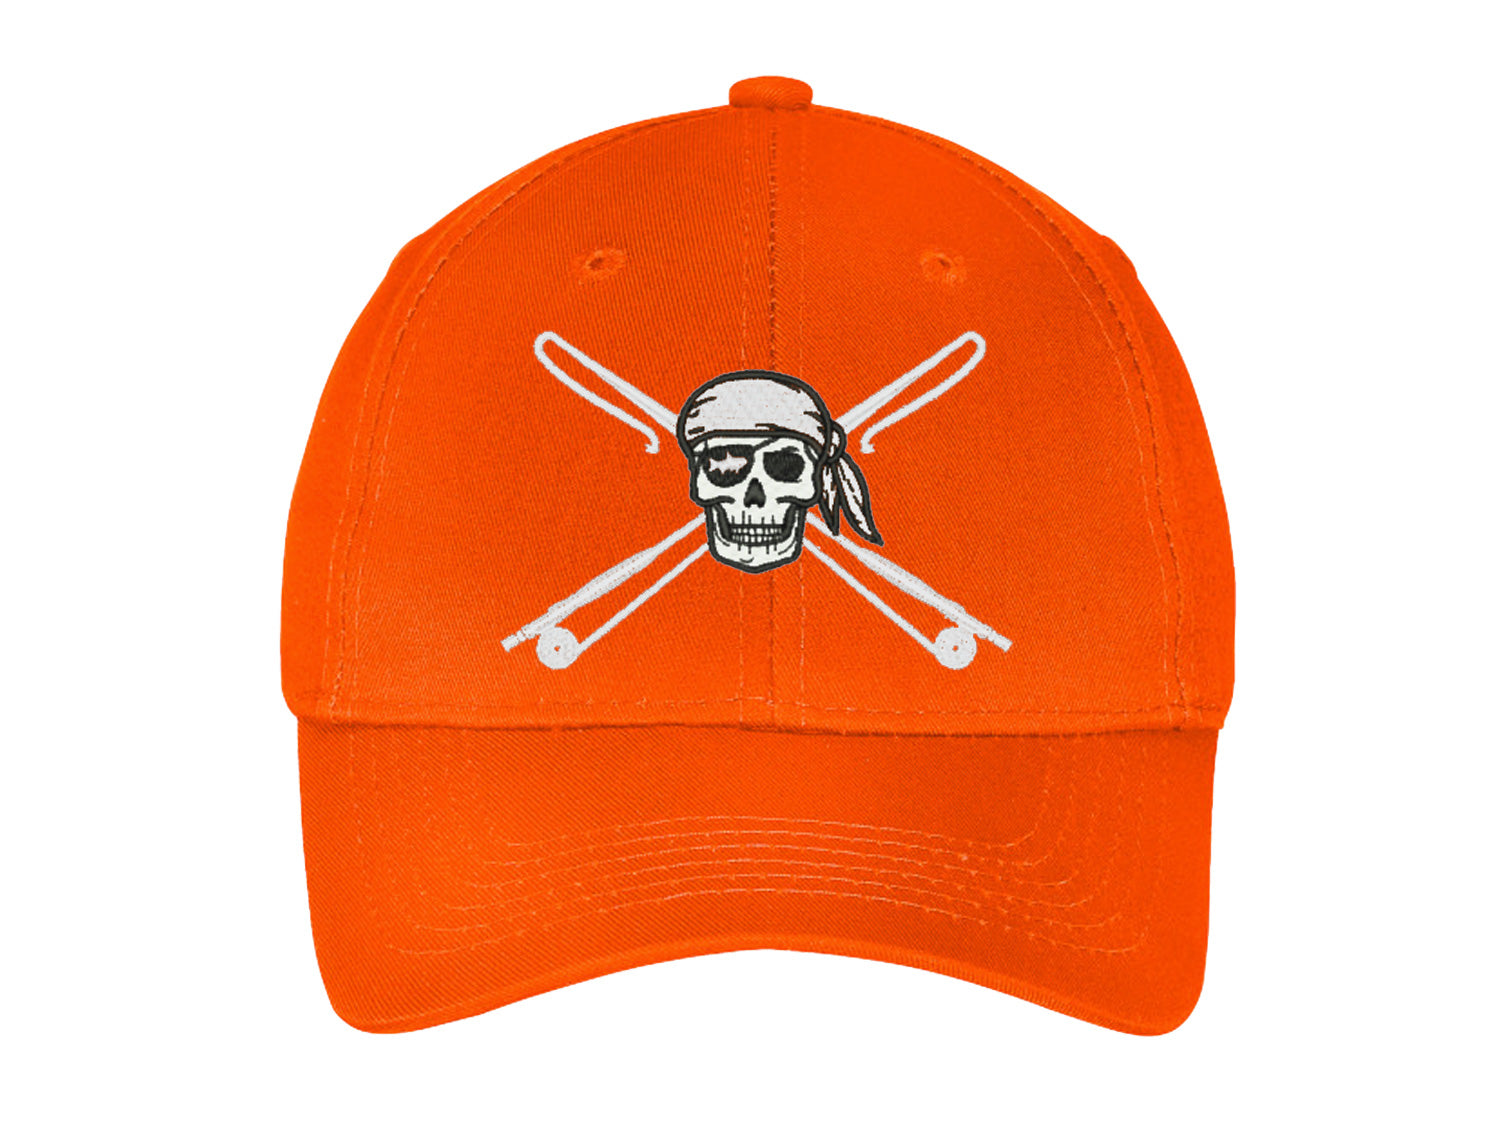 Youth Fishing Hats -Tarpon & Pirate Skull with Fishing Rods Logo -*10 Colors! Orange / Adjustable/Youth